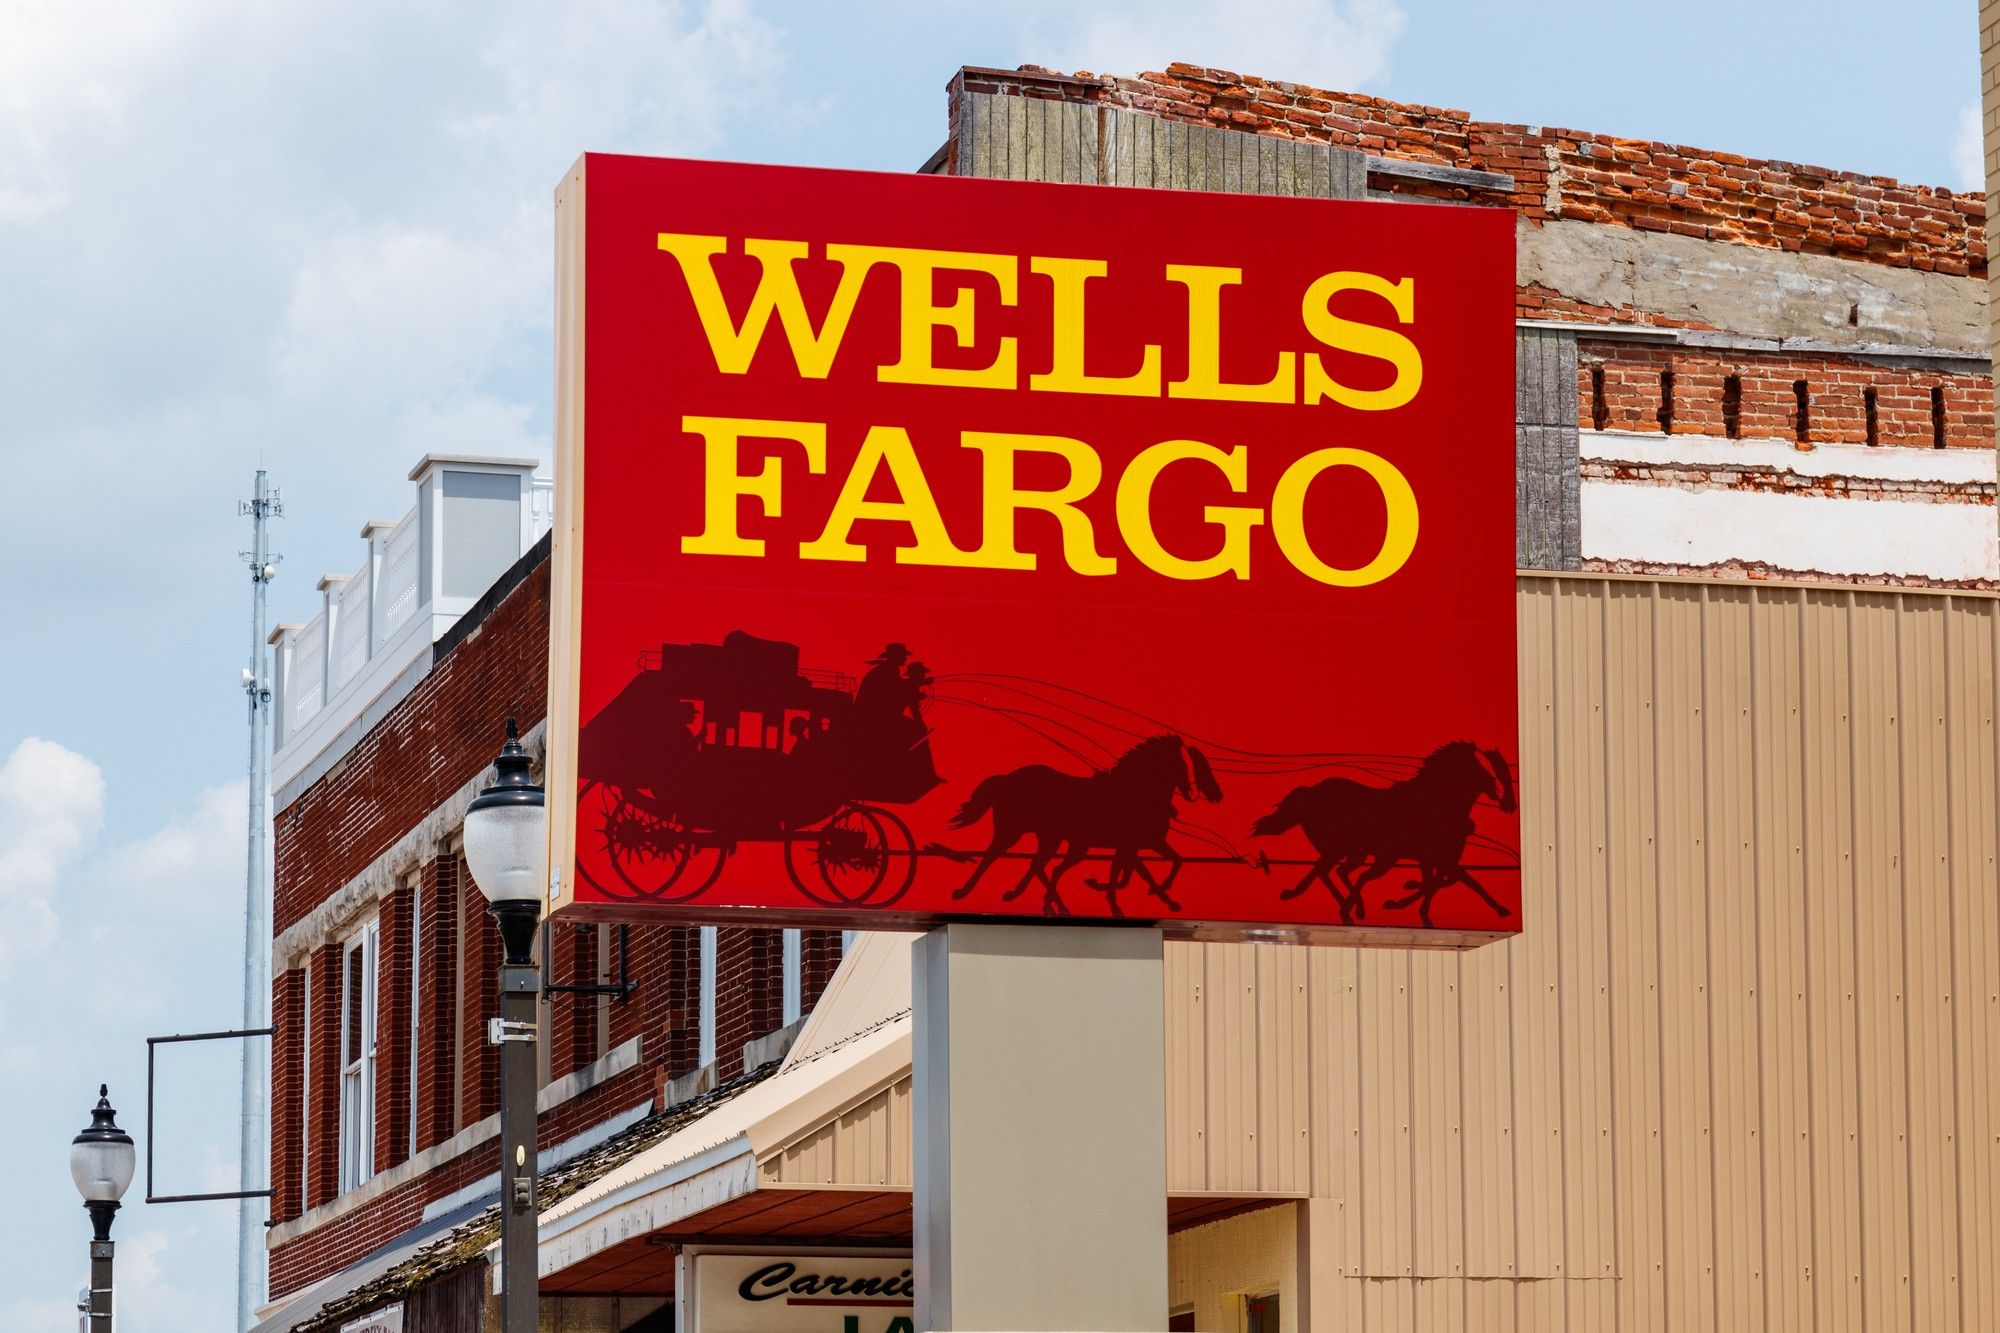 Wells Fargo has agreed not to enter homeowners into mortgage forbearance plans without their consent. 